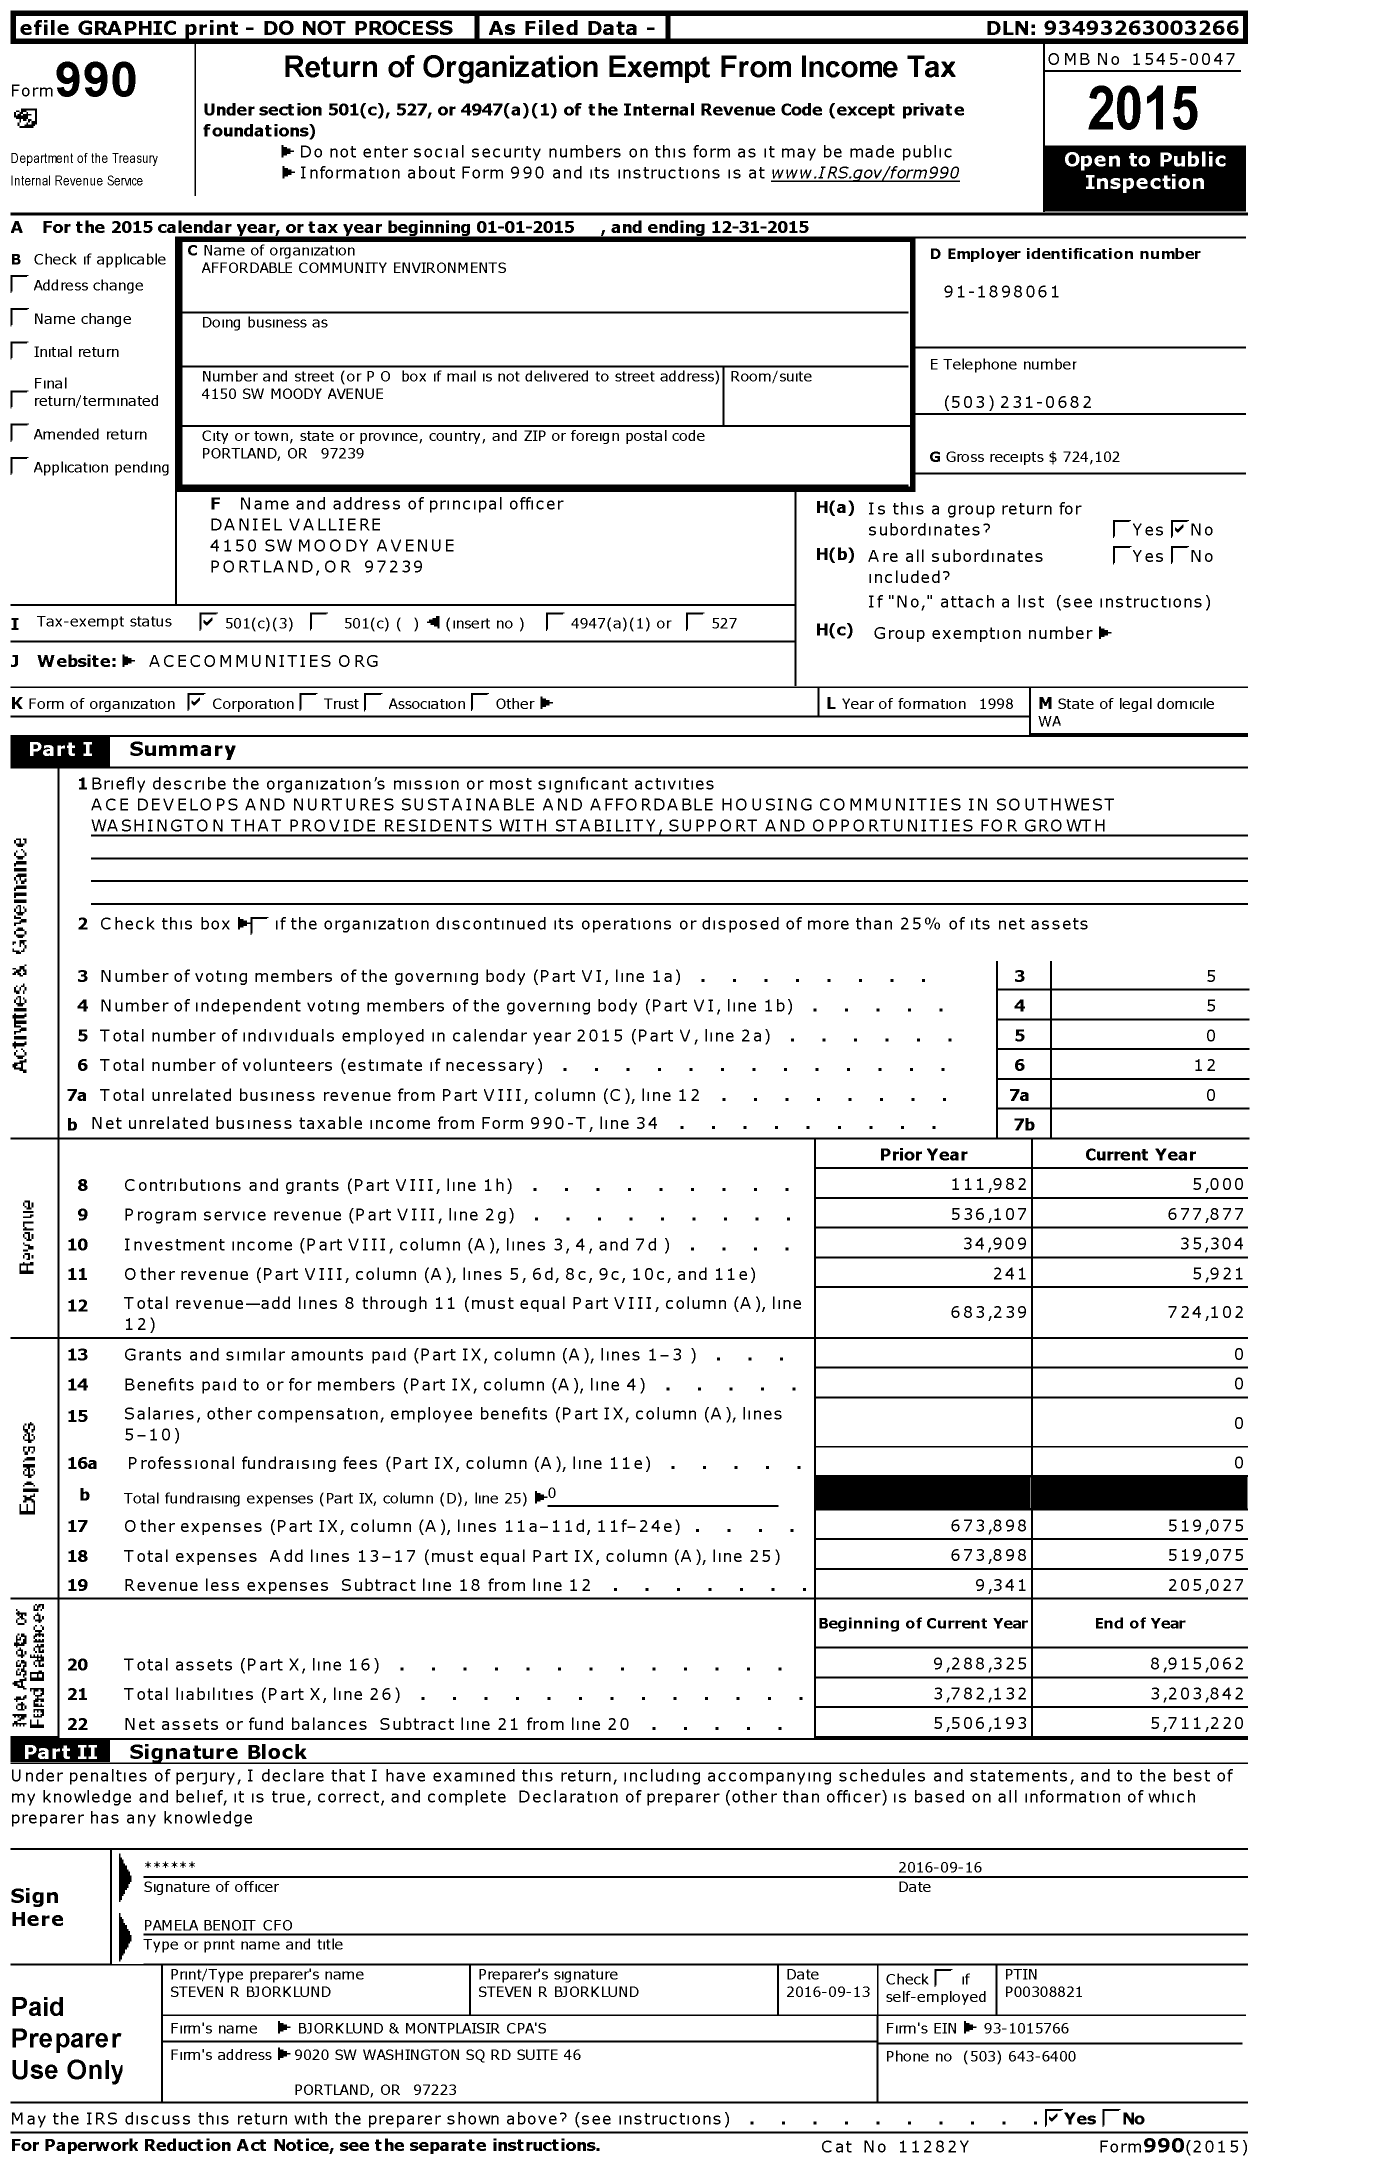 Image of first page of 2015 Form 990 for Affordable Community Environments